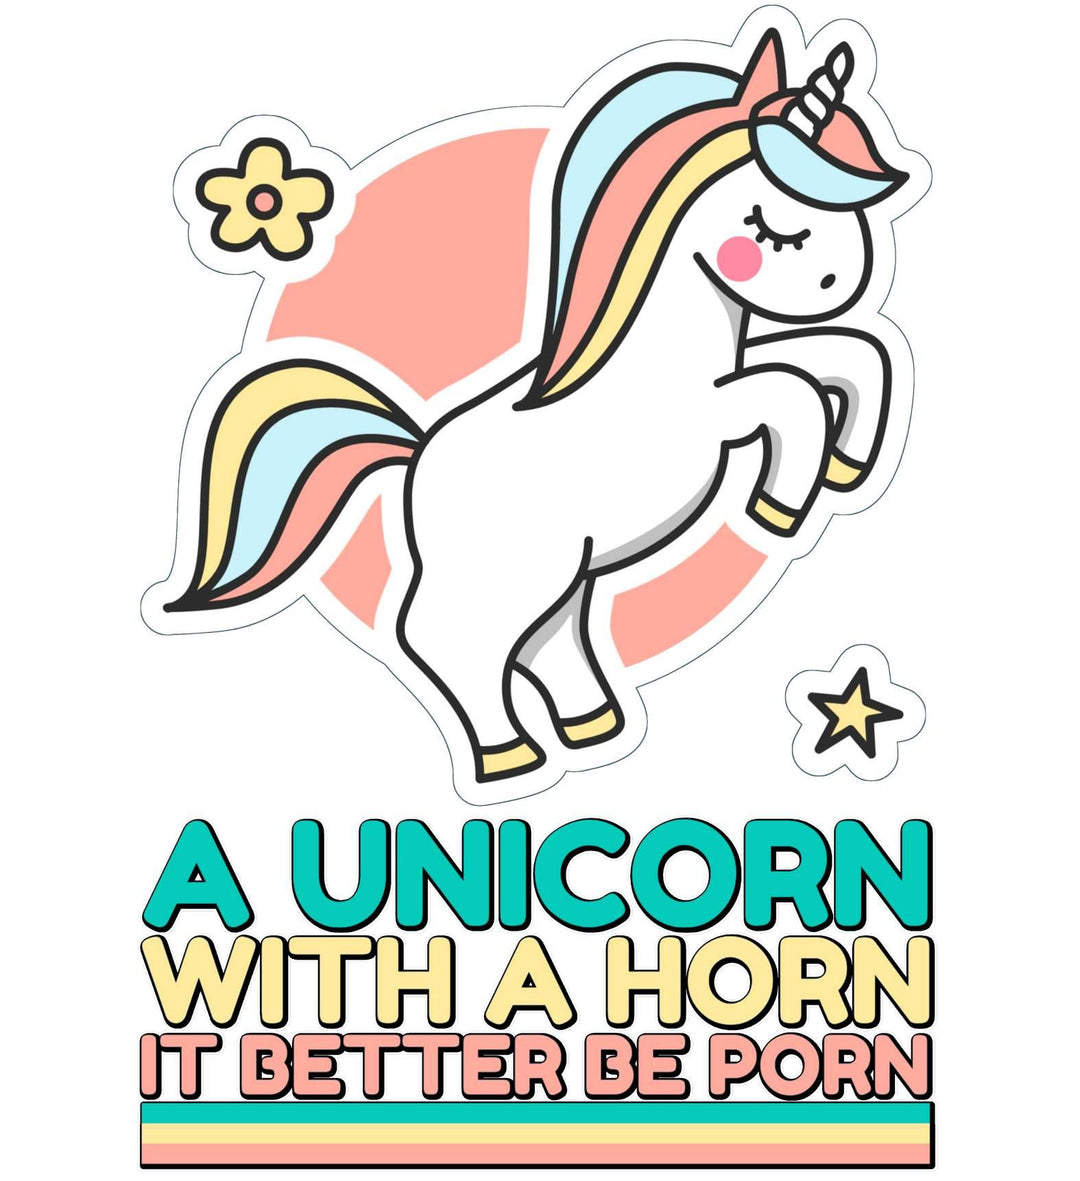 A unicorn with a horn it better be porn - Tank Top - Witty Twisters T-Shirts